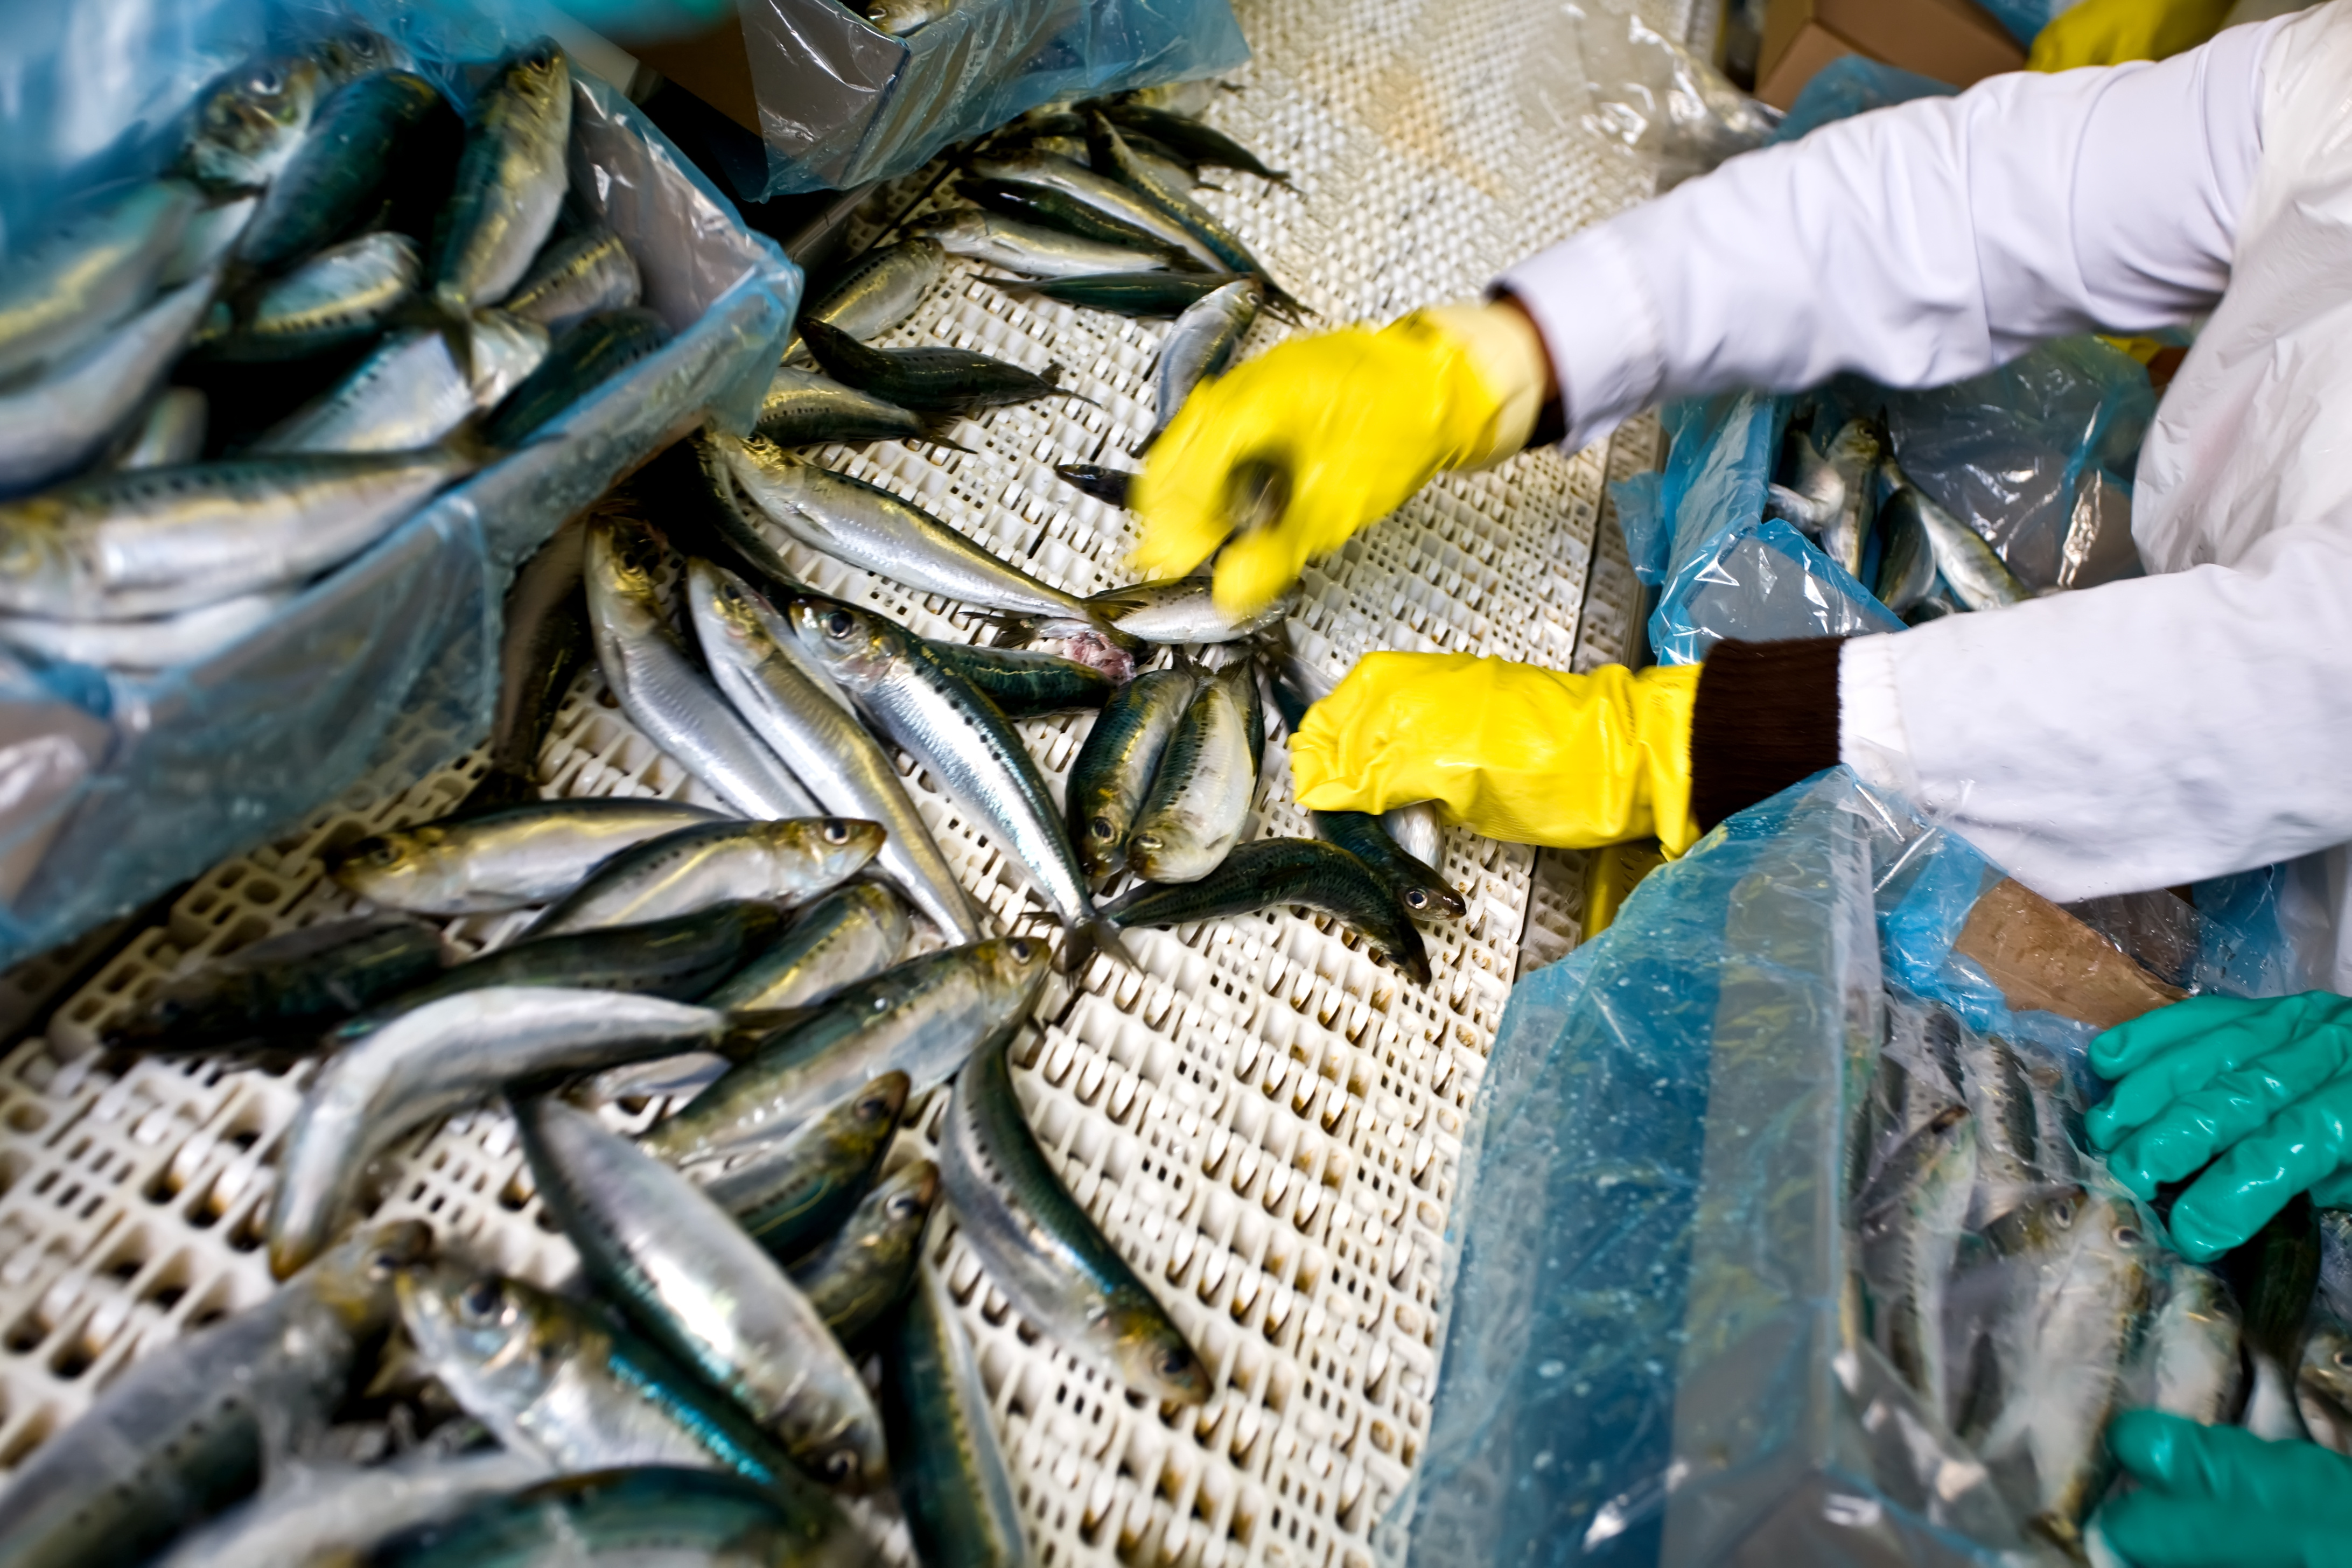 Collaborative Robotics to Foster Innovation in Seafood Handling (FISH)